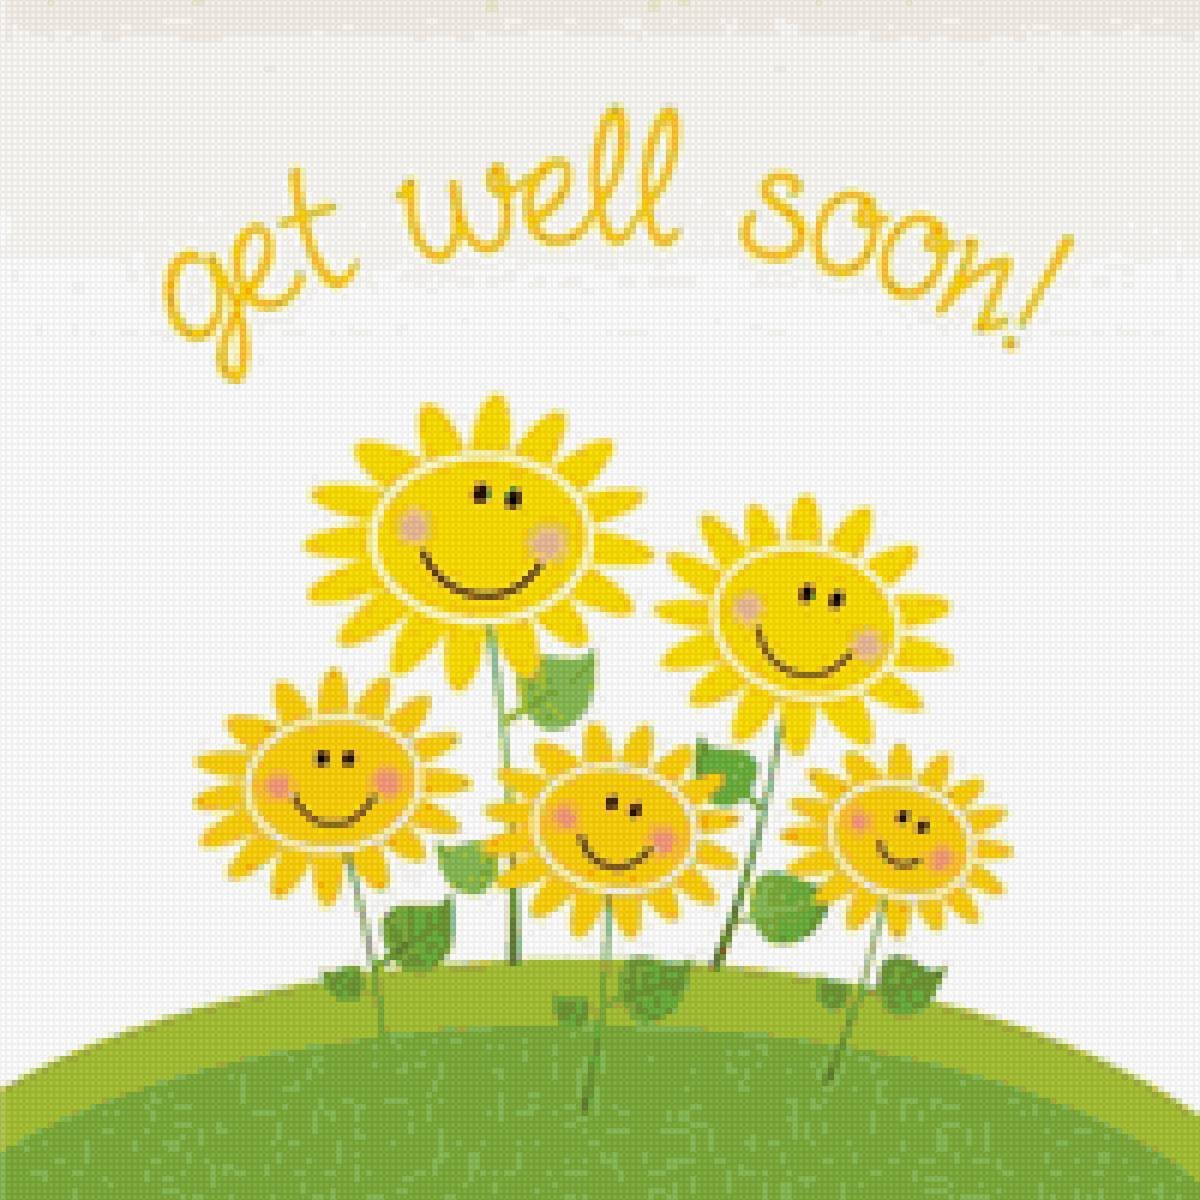 Let s all be well. Открытка get well soon. Get better soon открытка. Get well открытка. Открытка выздоравливай на английском.